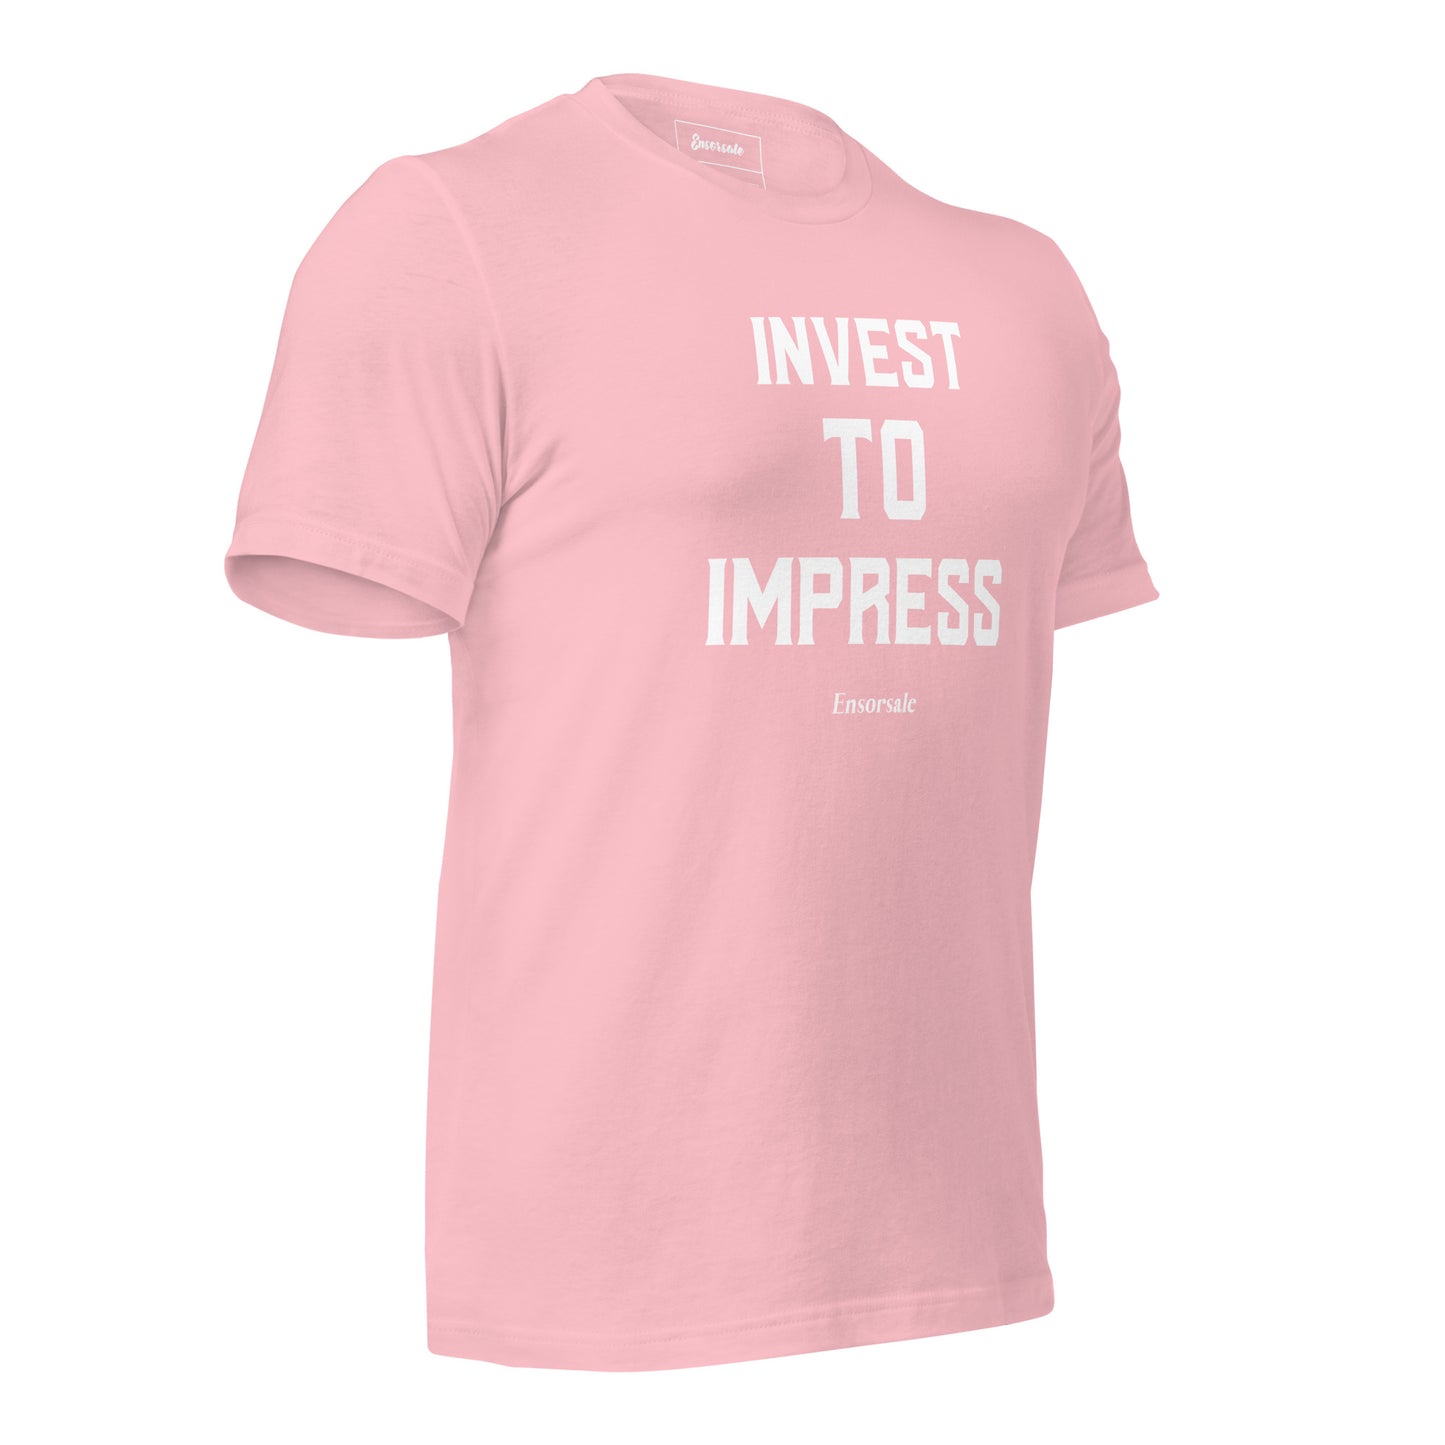 Invest To Impress t-shirt